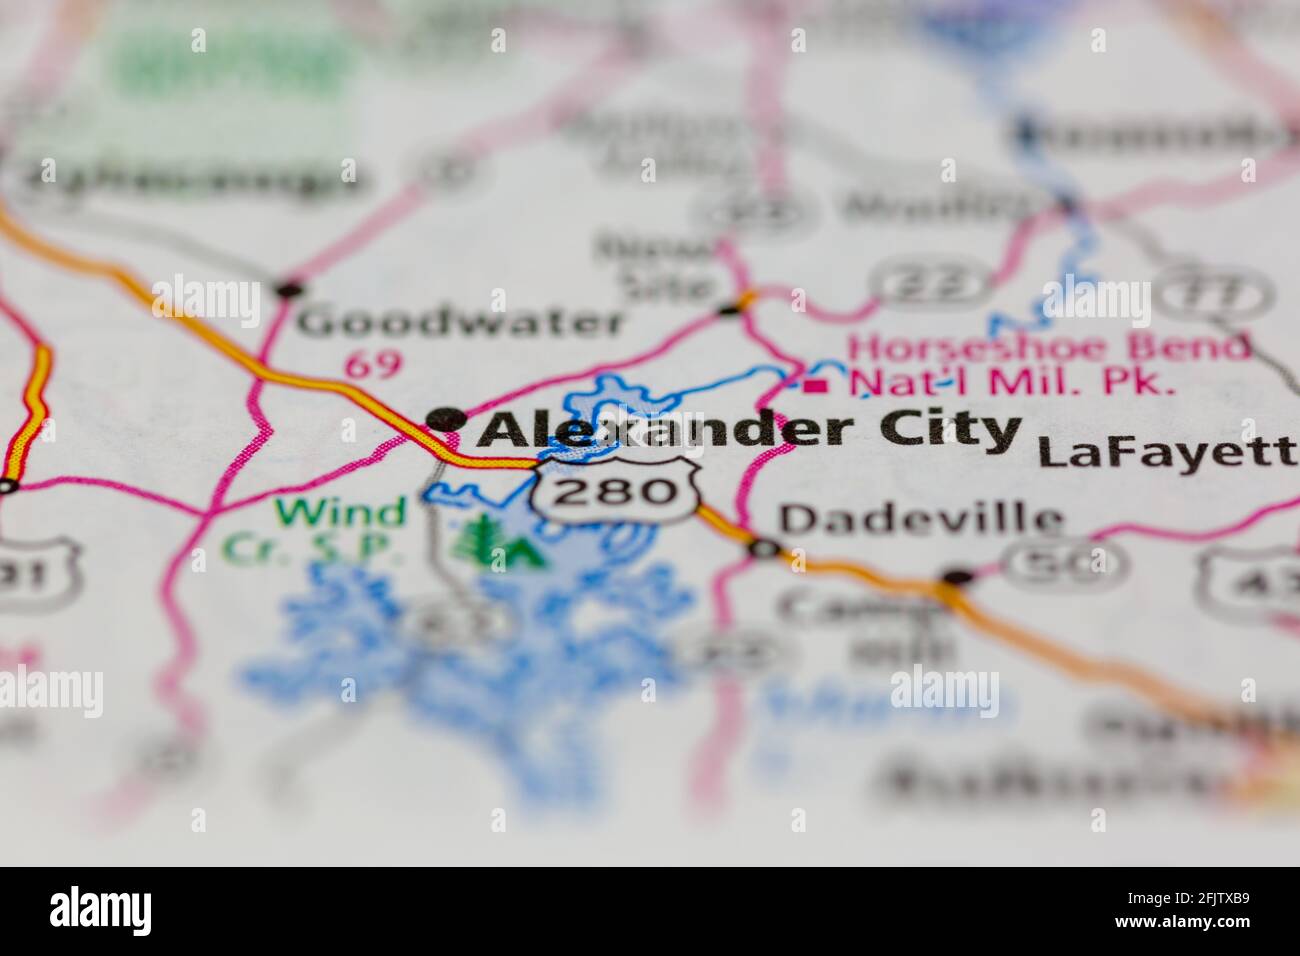 Alexander City Alabama USA shown on a road map or geography map Stock Photo